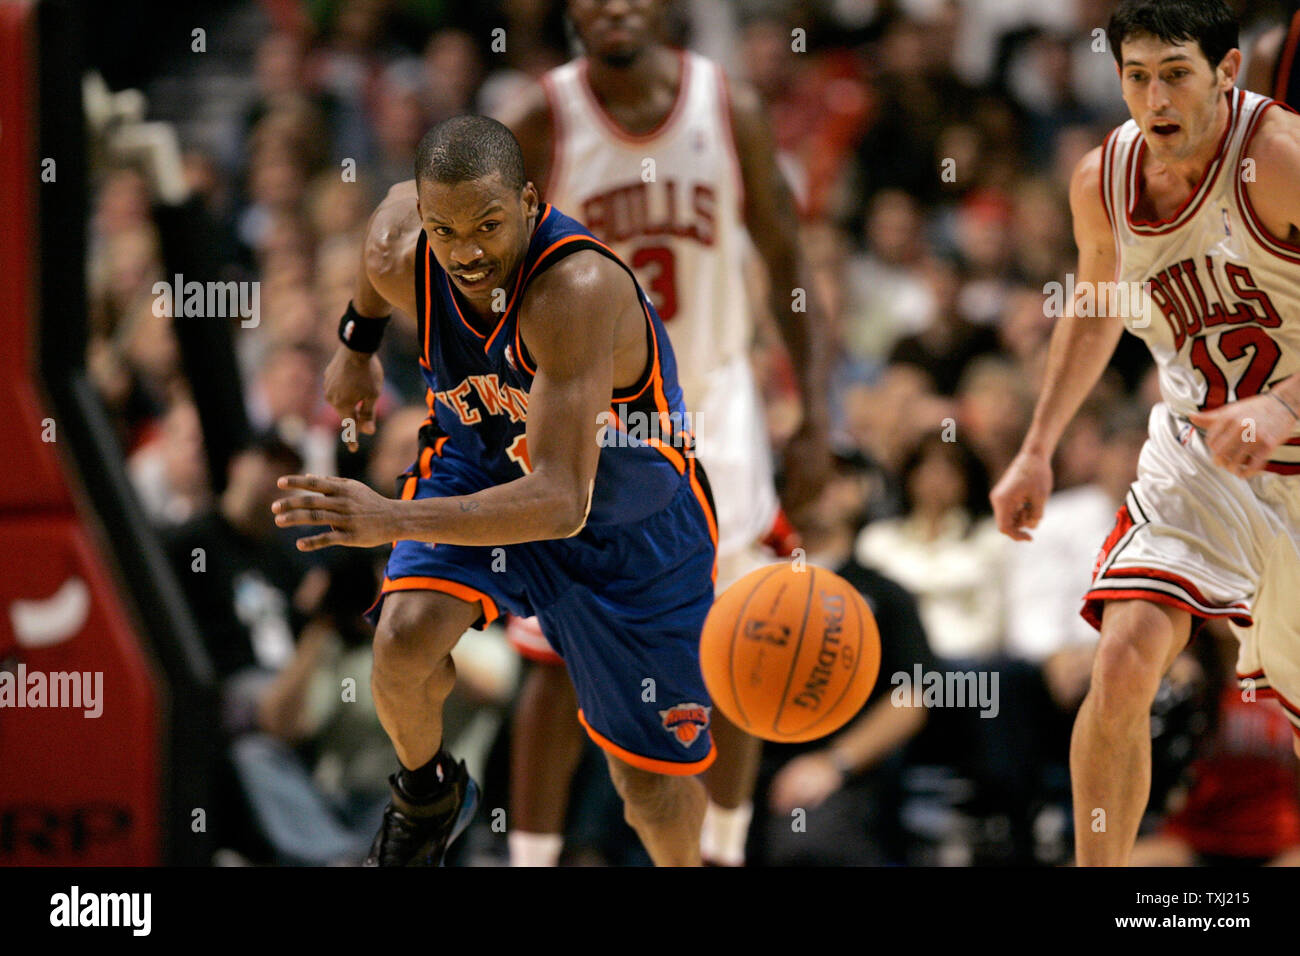 New York Knicks guard Steve Francis, left, chases down a loose ball during the fourth quarter against the Chicago Bulls in Chicago on November 28, 2006. The Bulls won 102-85. (UPI Photo/Brian Kersey) Stock Photo